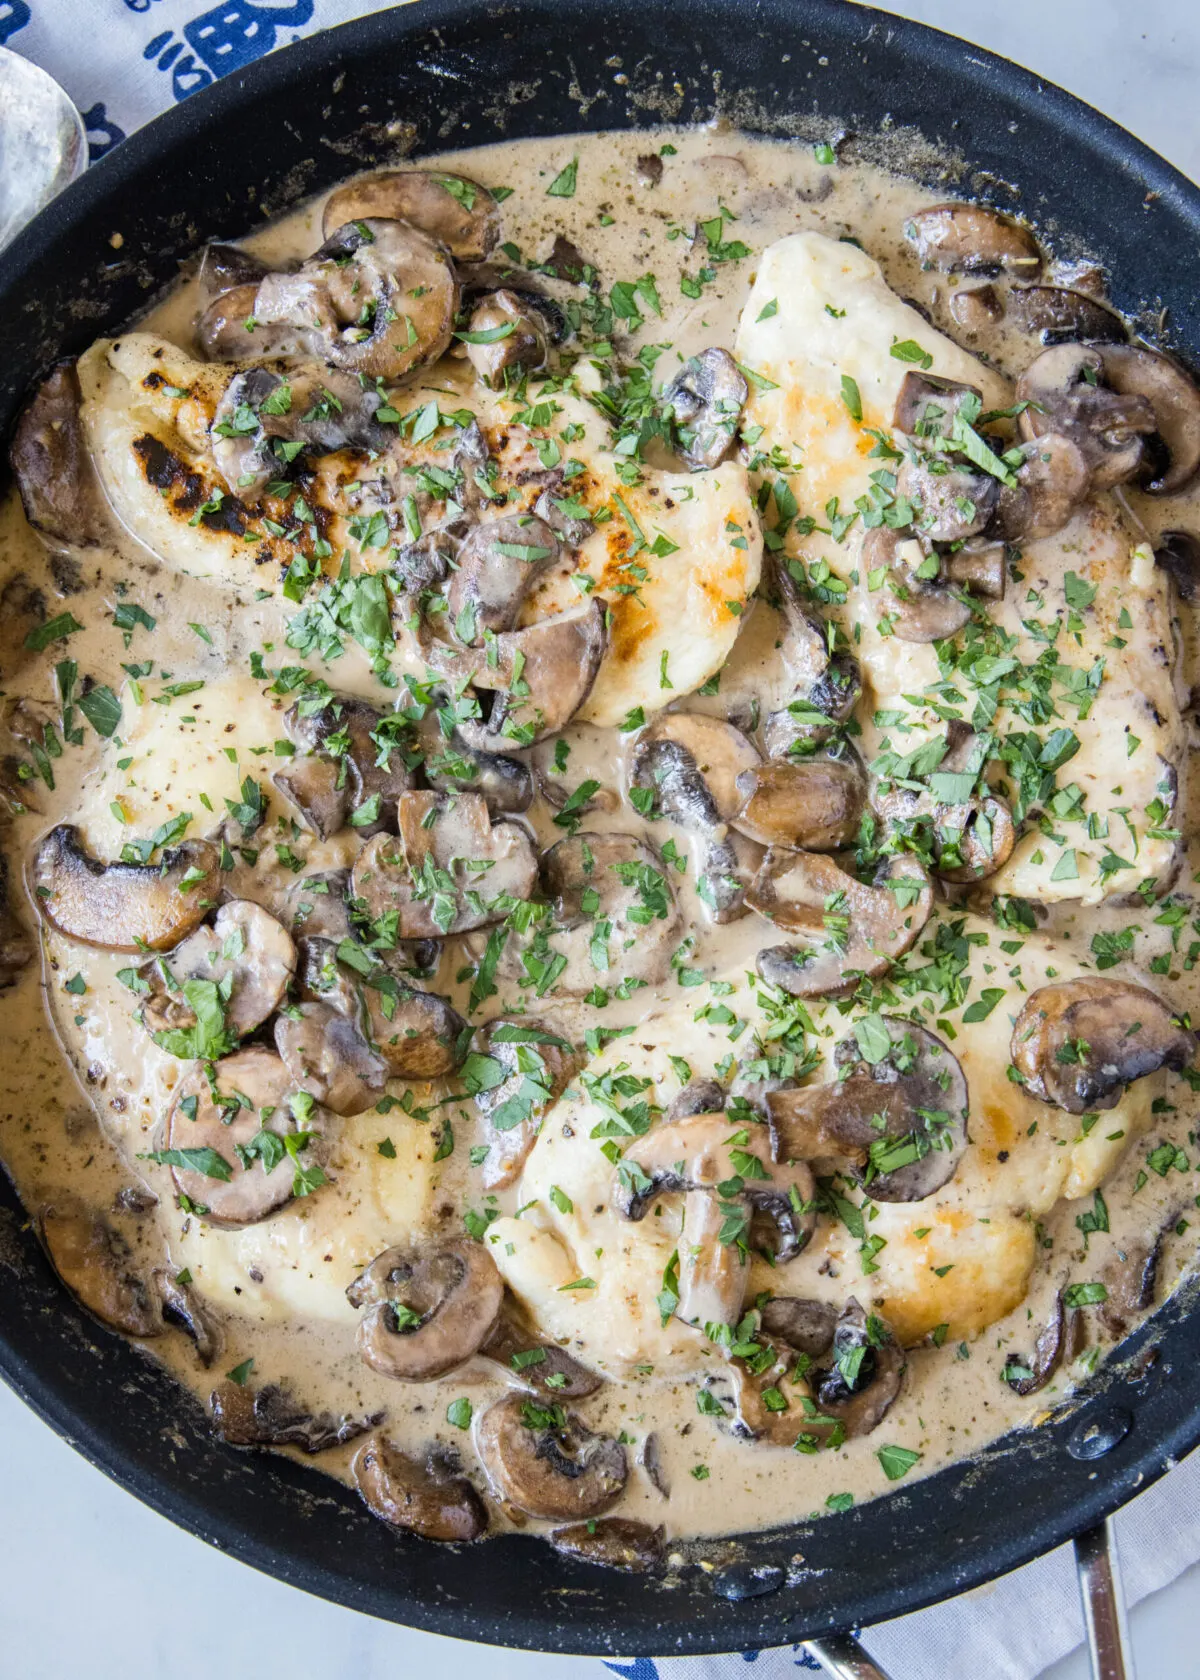 Overhead view of a skillet filled with chicken breasts, mushrooms, and a cream sauce